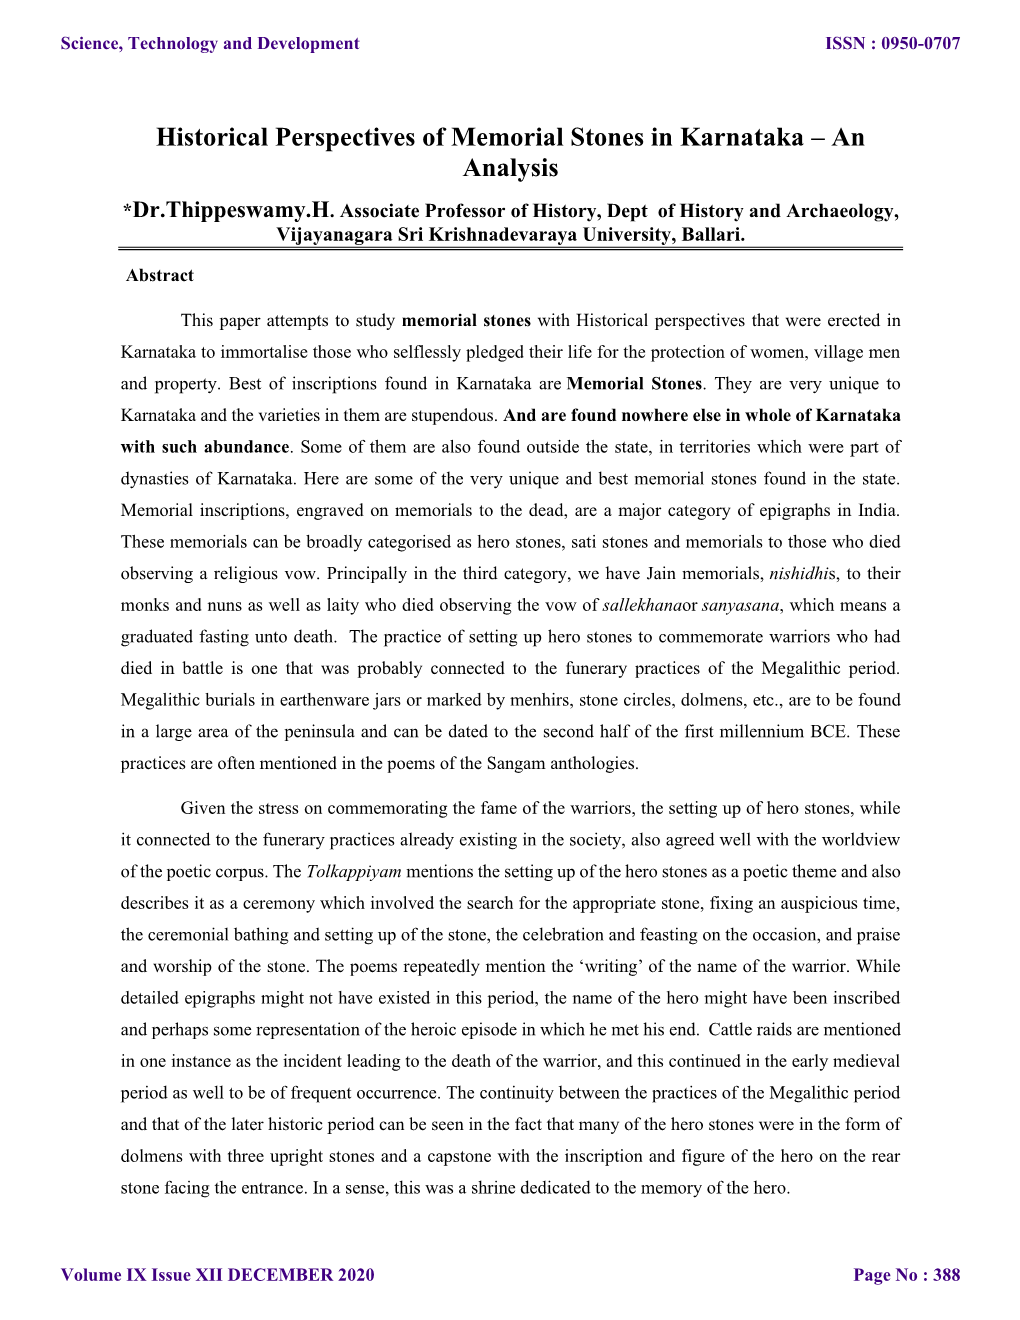 Historical Perspectives of Memorial Stones in Karnataka – an Analysis *Dr.Thippeswamy.H